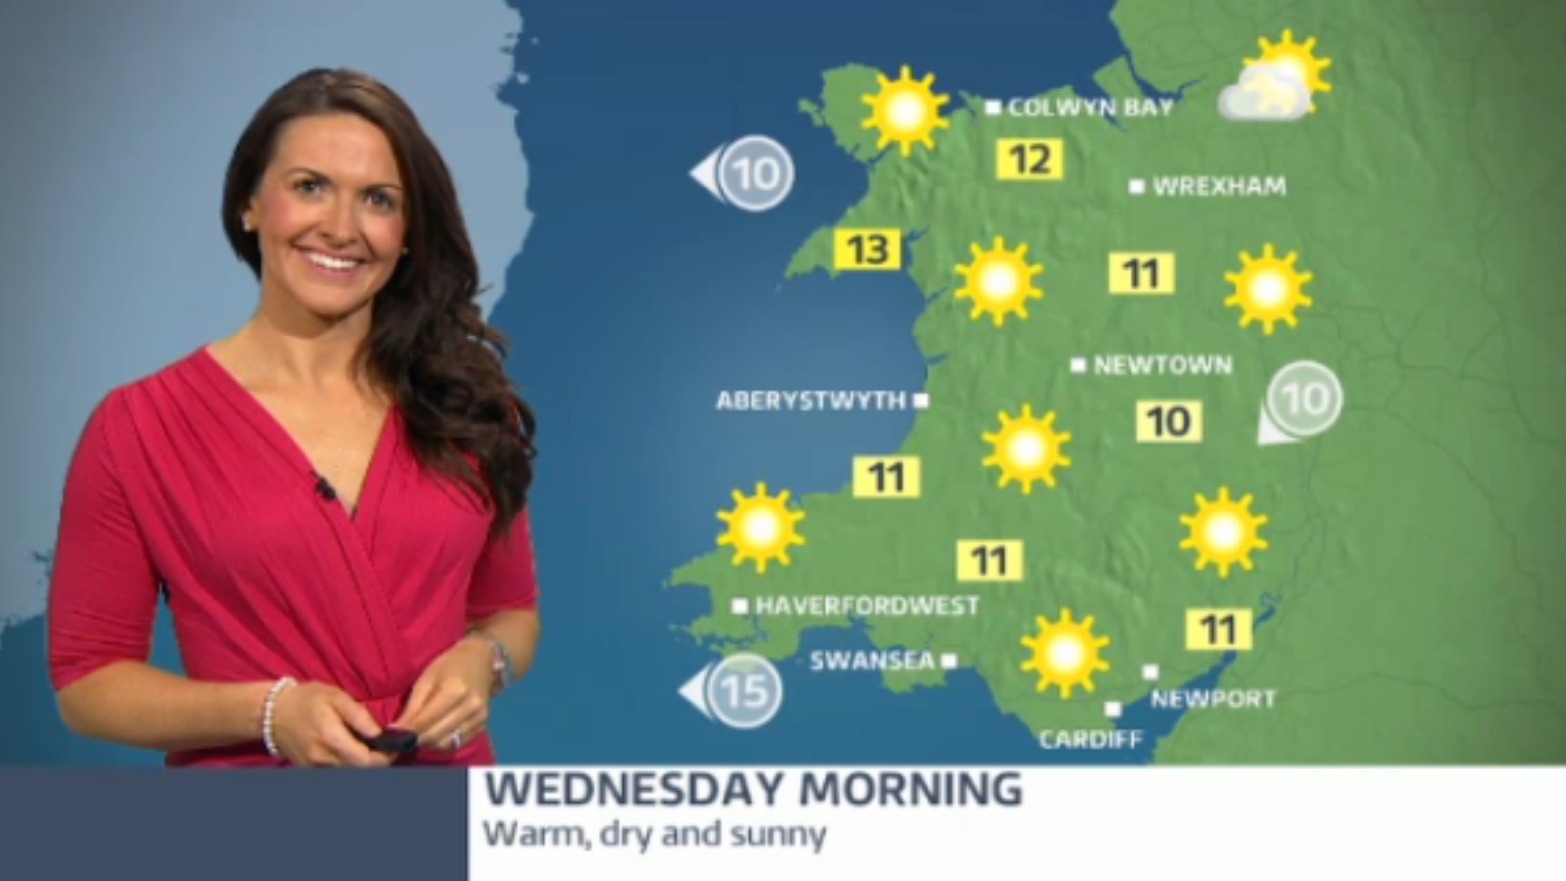 Warm weather continuing with another fine and sunny day | ITV News Wales